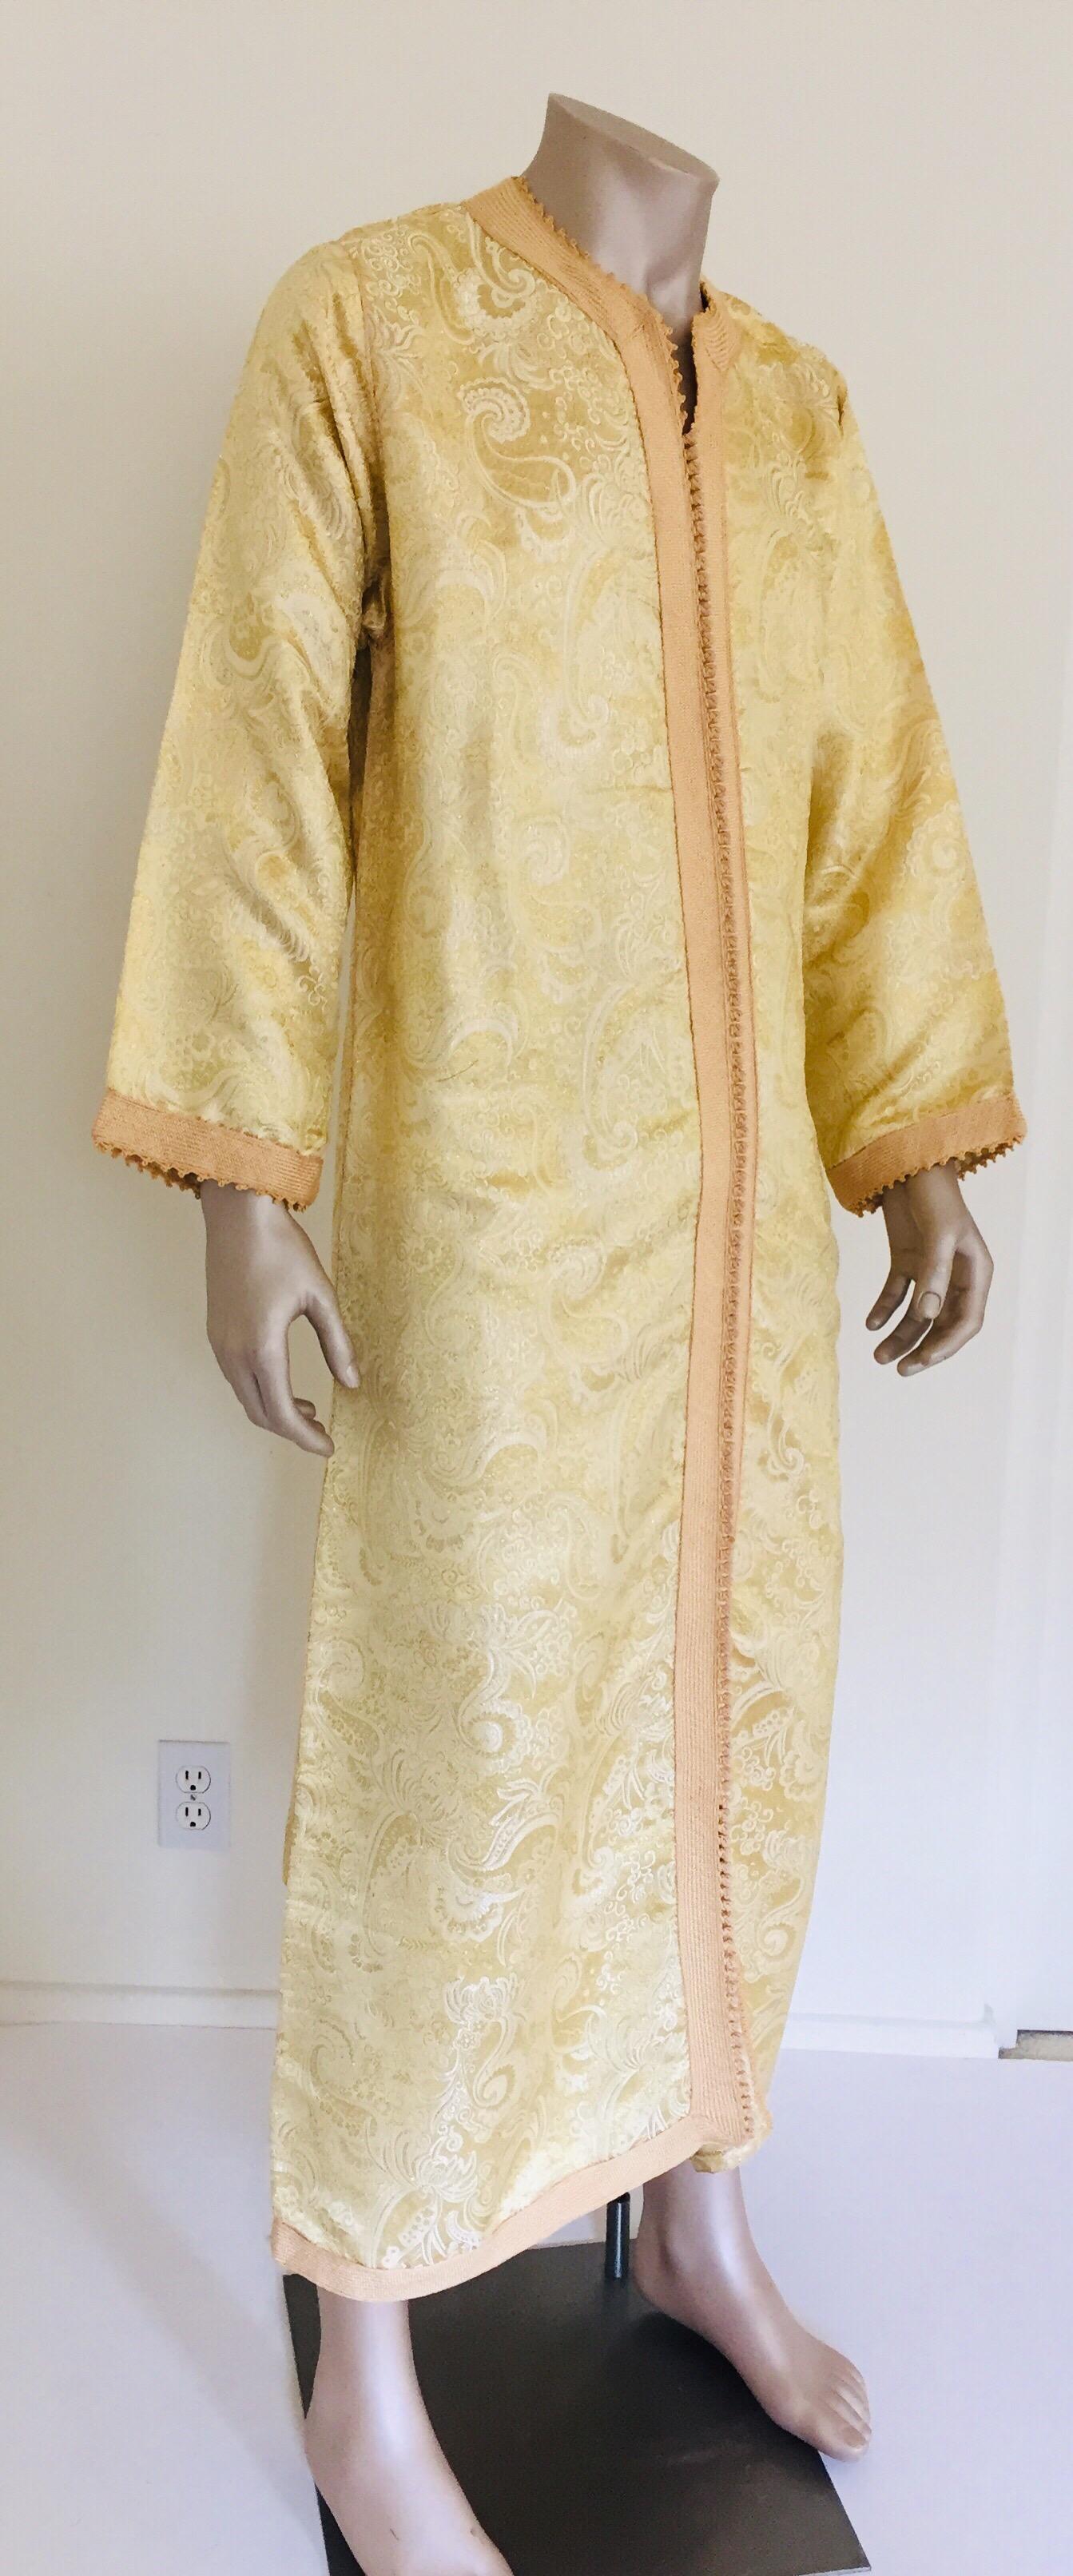 Hand-Carved Moroccan Kaftan Gold and Silver Brocade 1970s Maxi Dress Caftan For Sale